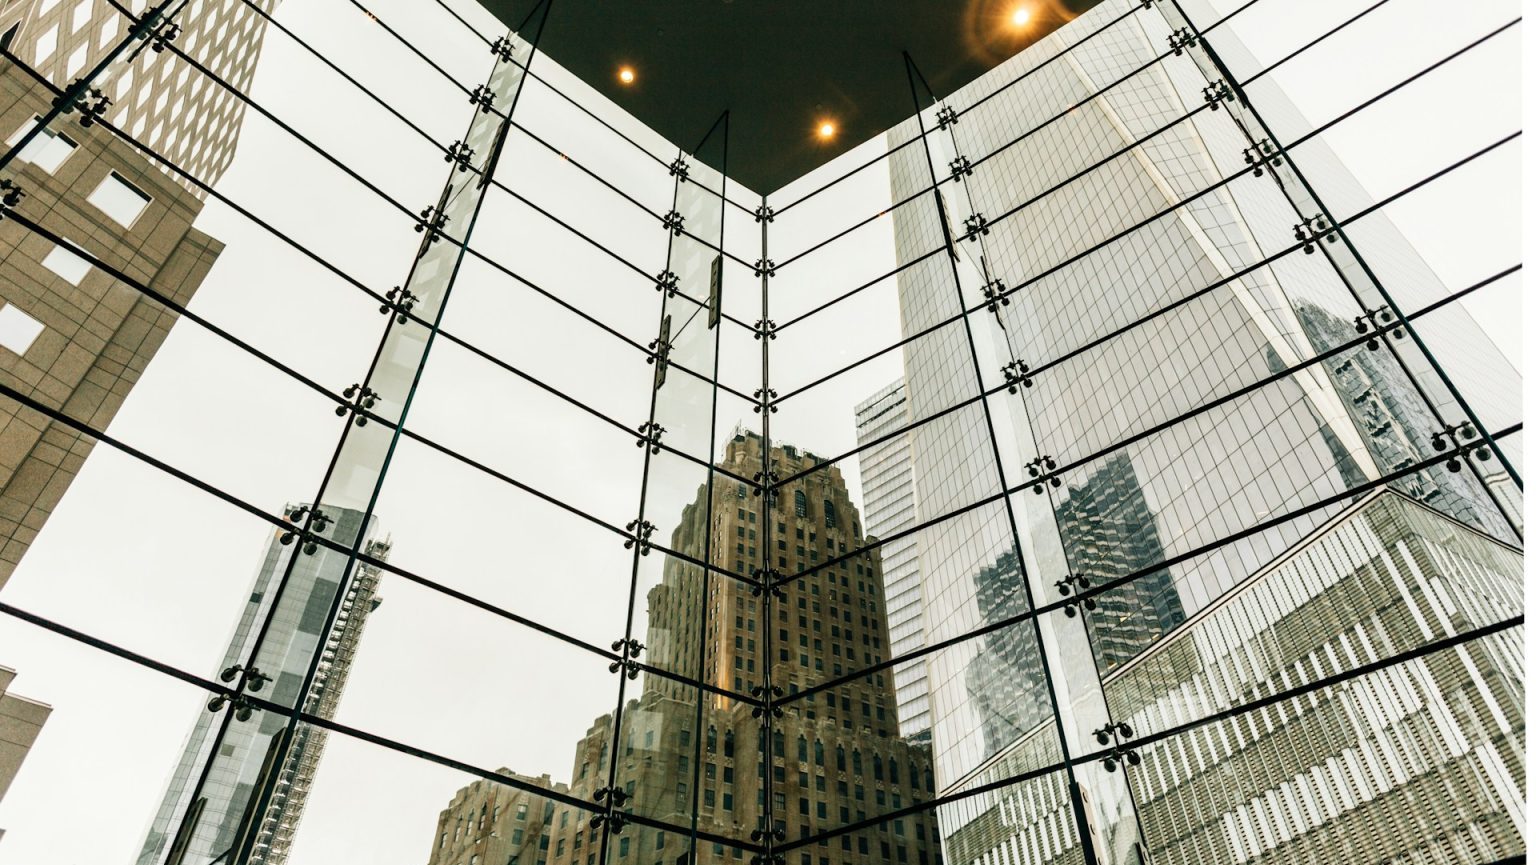 View of a cityscape through a large glass window framed by steel beams, showcasing high-rise buildings burdened with debt under an overcast sky.